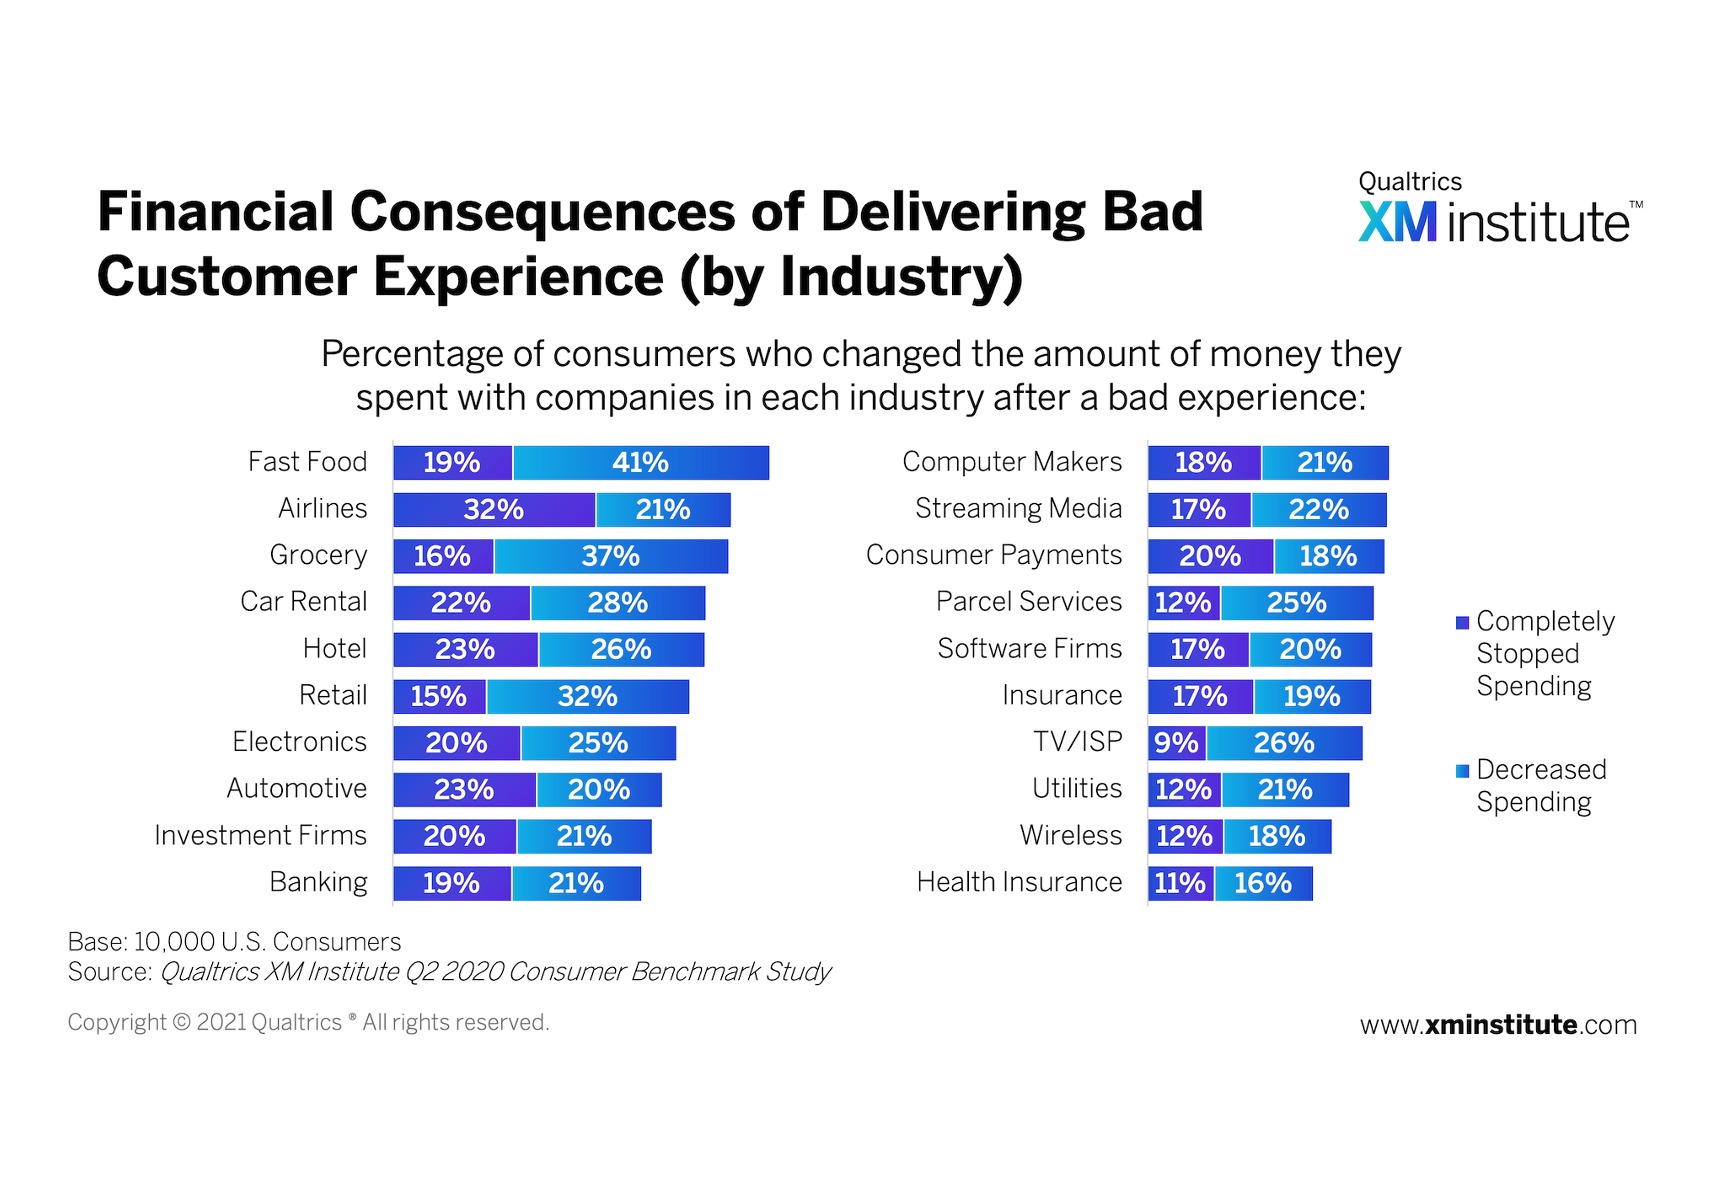 Financial Consequences of Delivering Bad Customer Experience (by Industry)